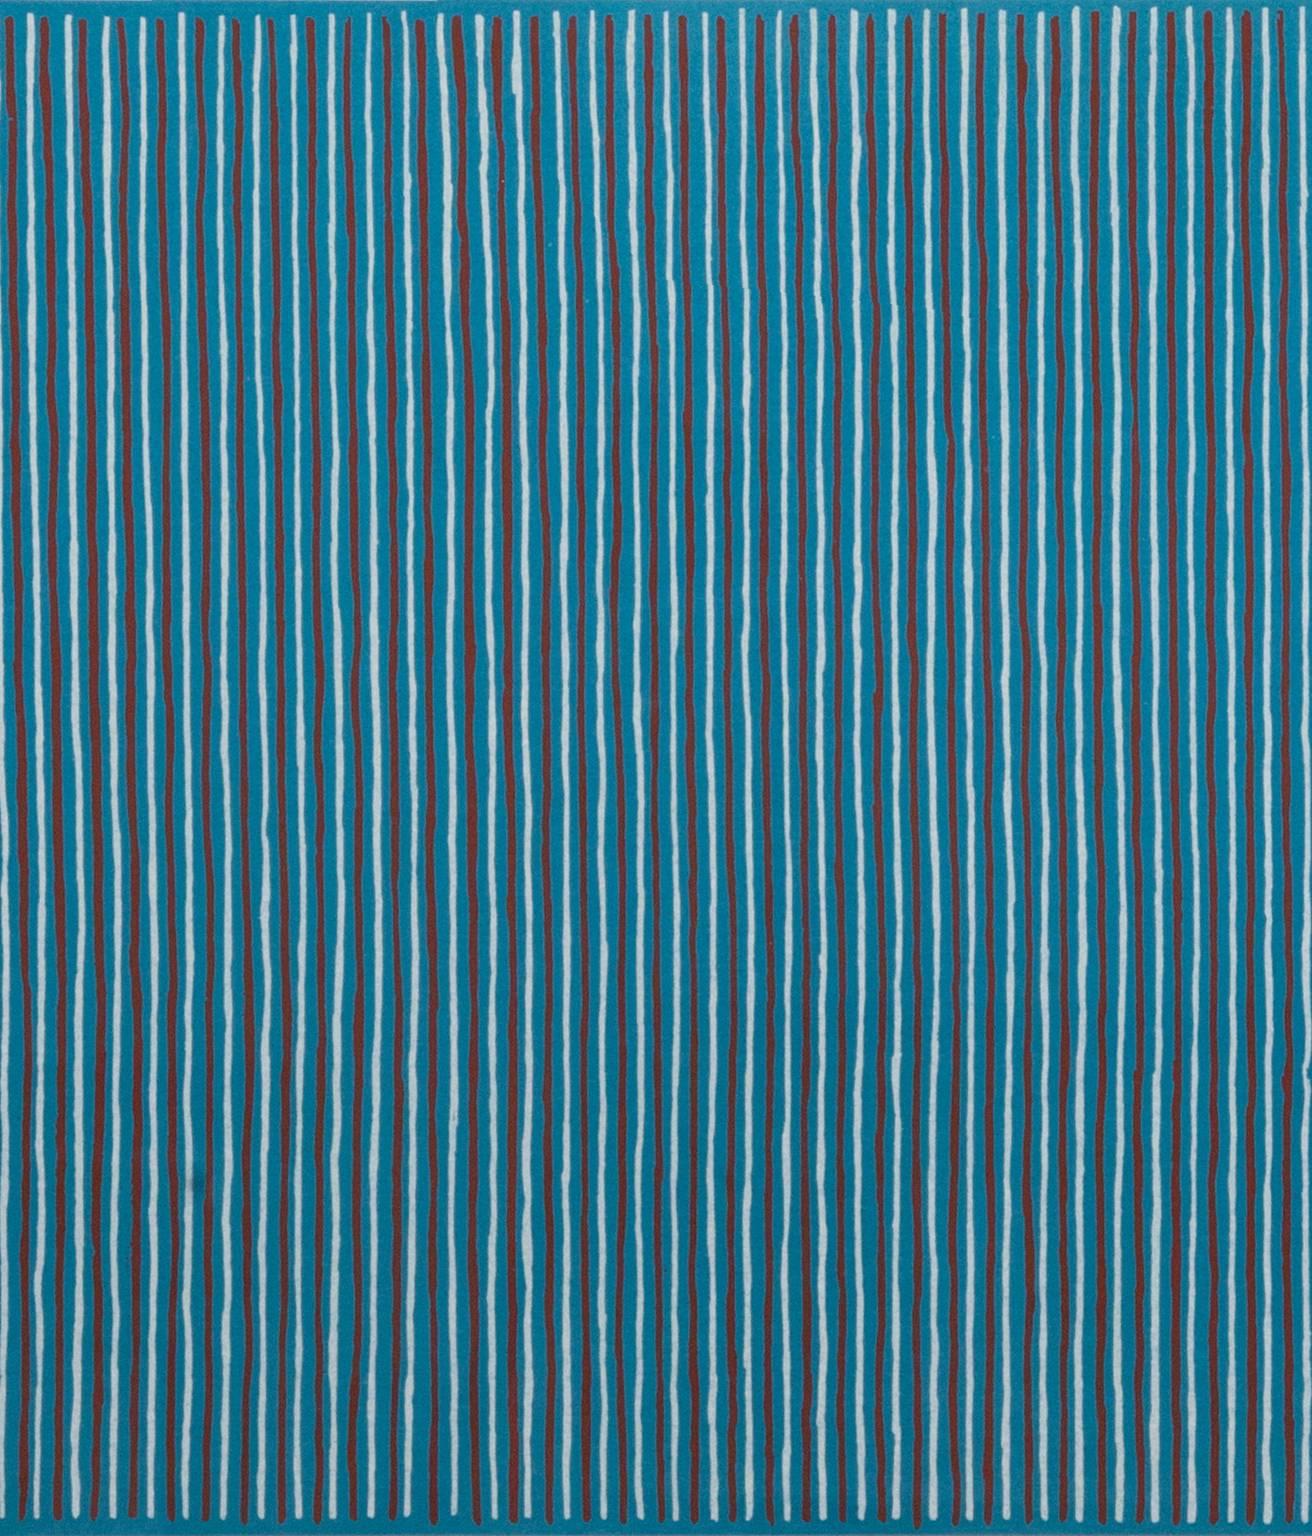 We are pleased to be offering another fantastic work by Gene Davis, whom we've nicknamed King of Stripes.

Gene Davis (1920-1985) is an important artist associated with the Color Field movement and the Washington Color School. 

He is noted for